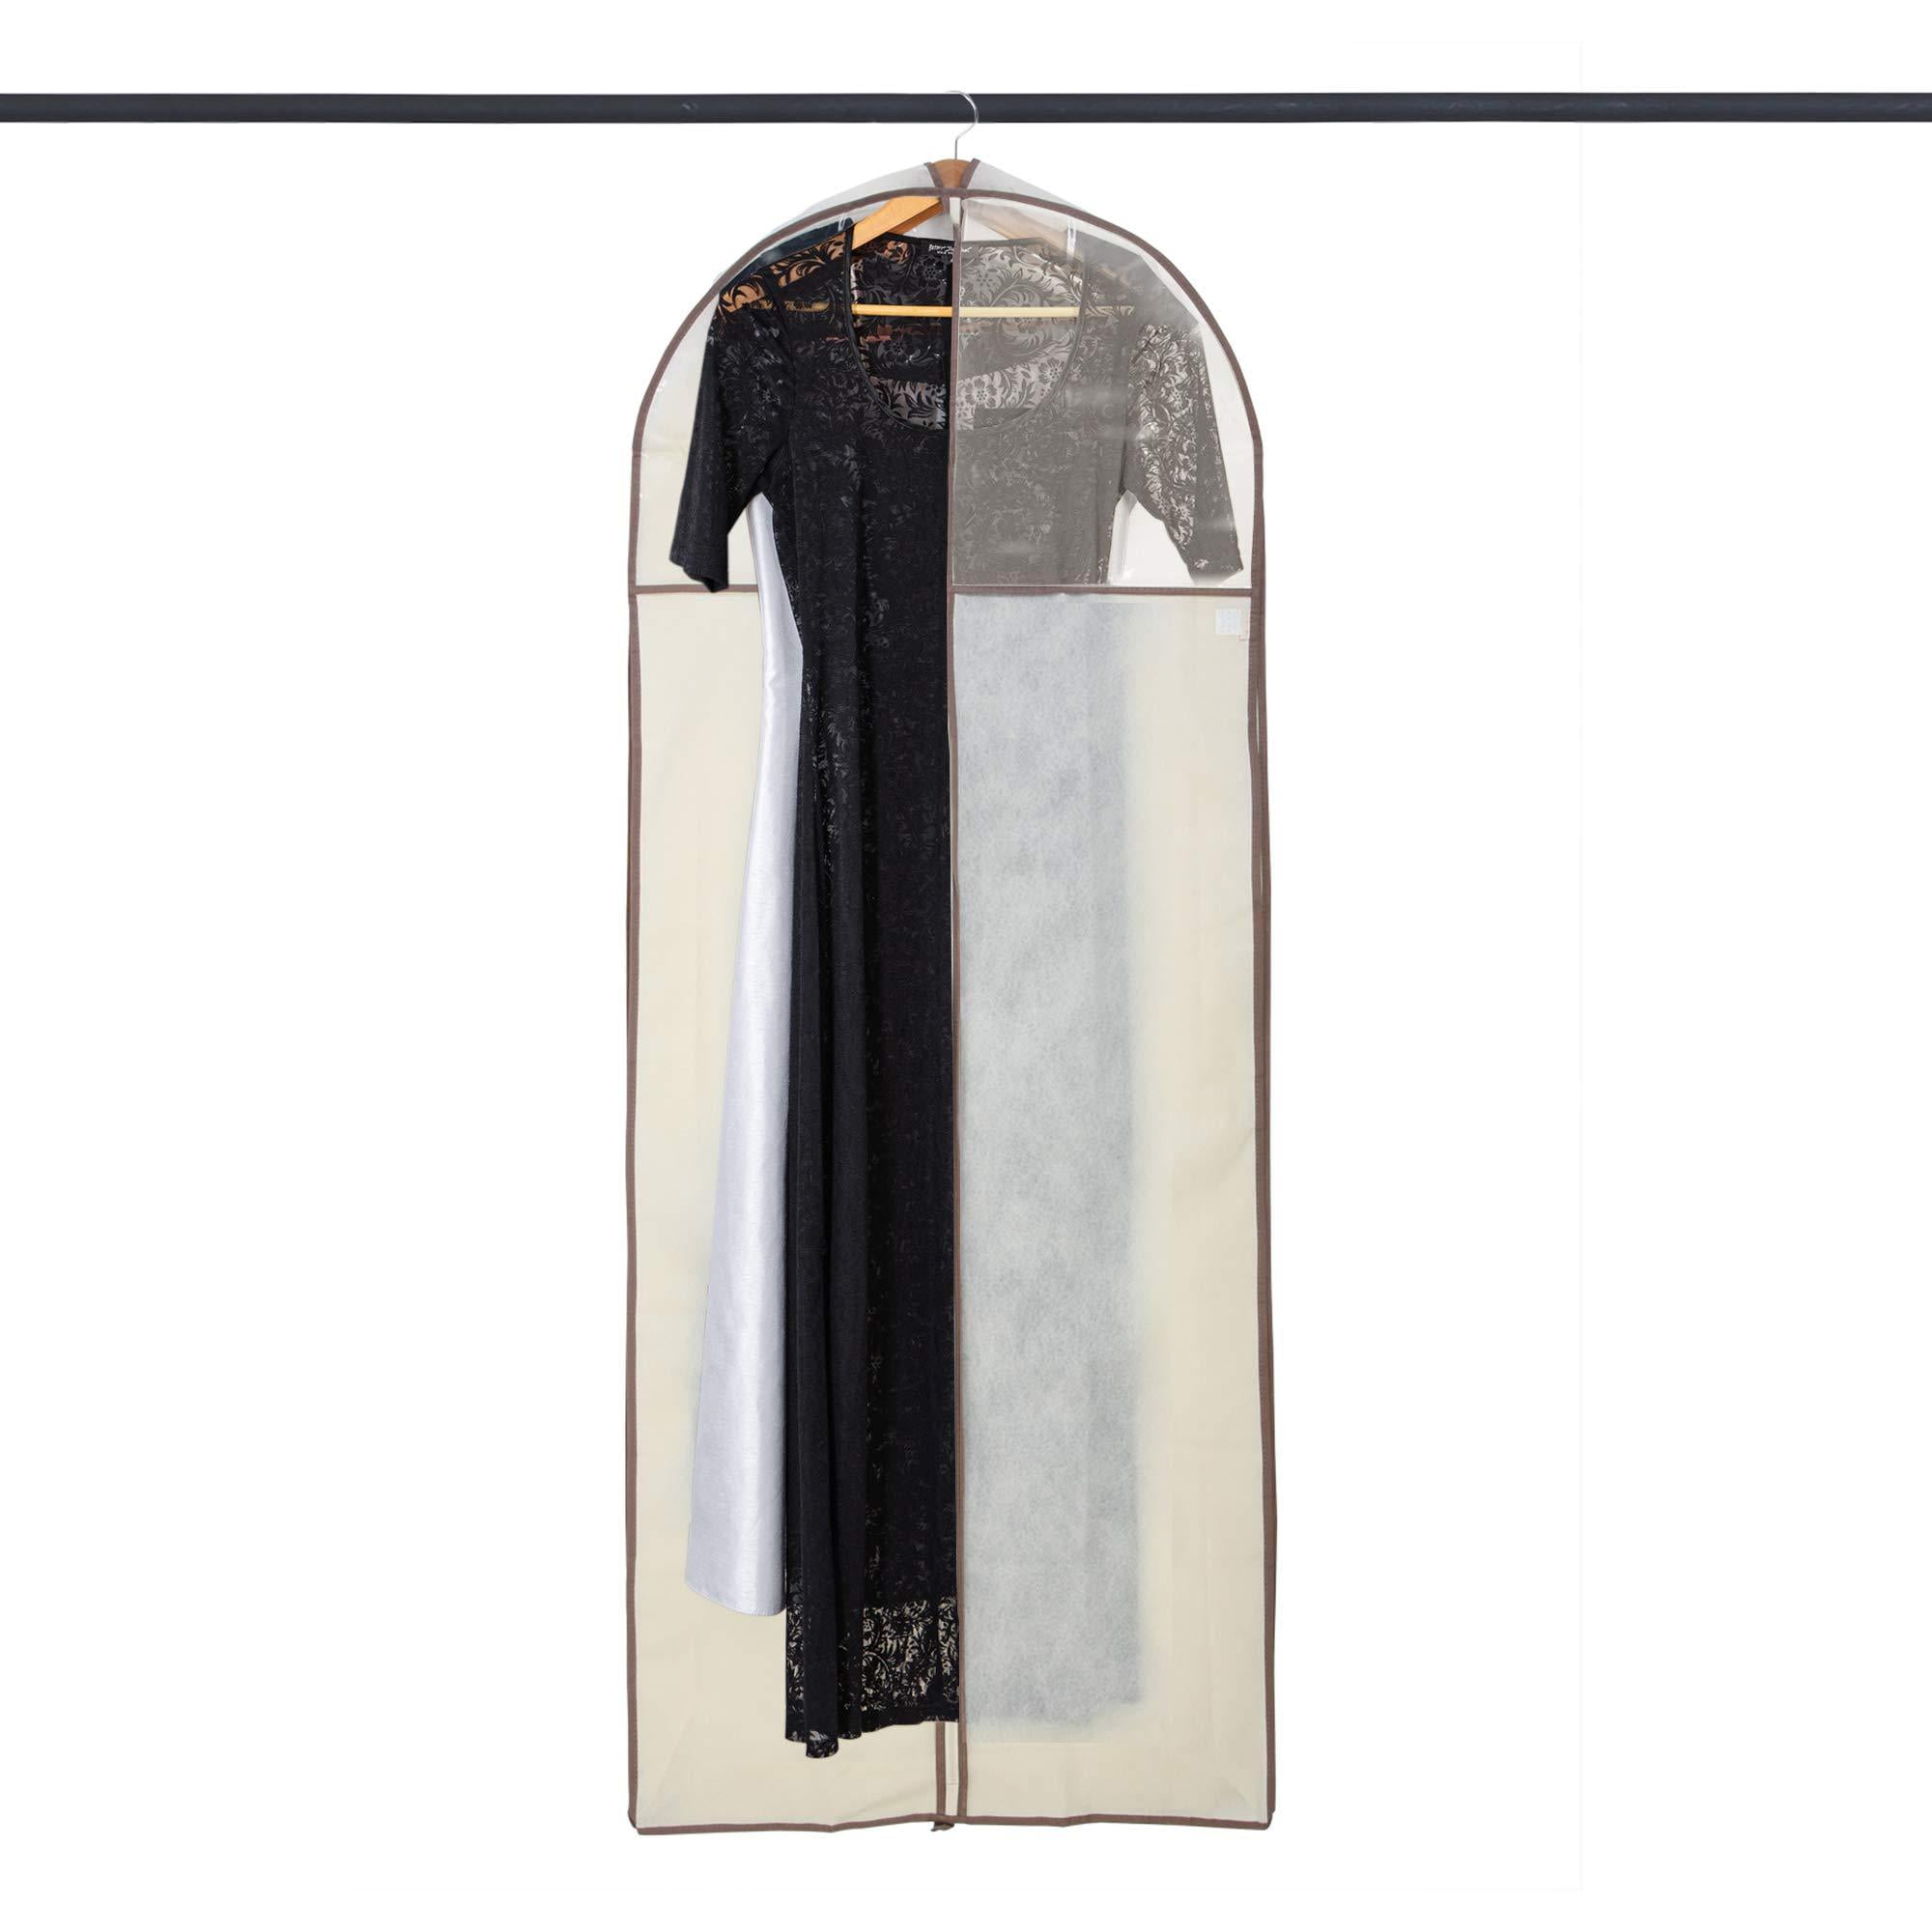 Garment Bags and Covers  Product Display Solutions